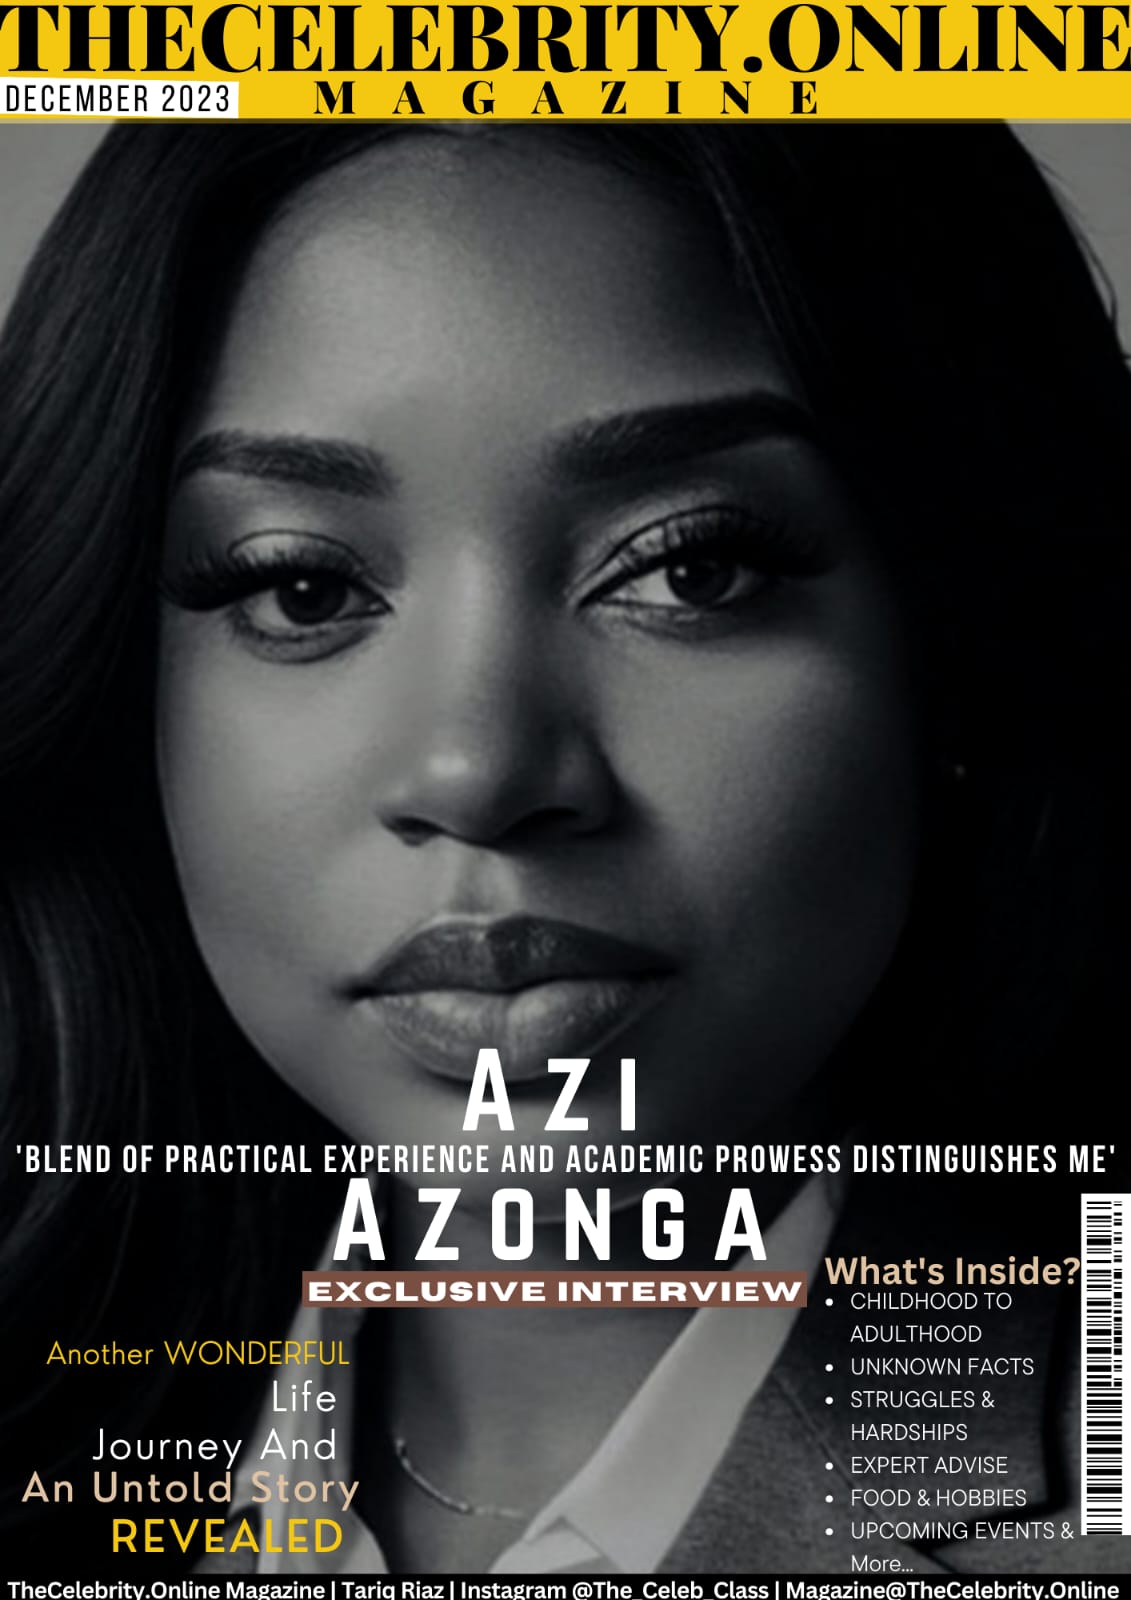 Azi Azonga Exclusive Interview – ‘Blend Of Practical Experience And Academic Prowess Distinguishes Me’